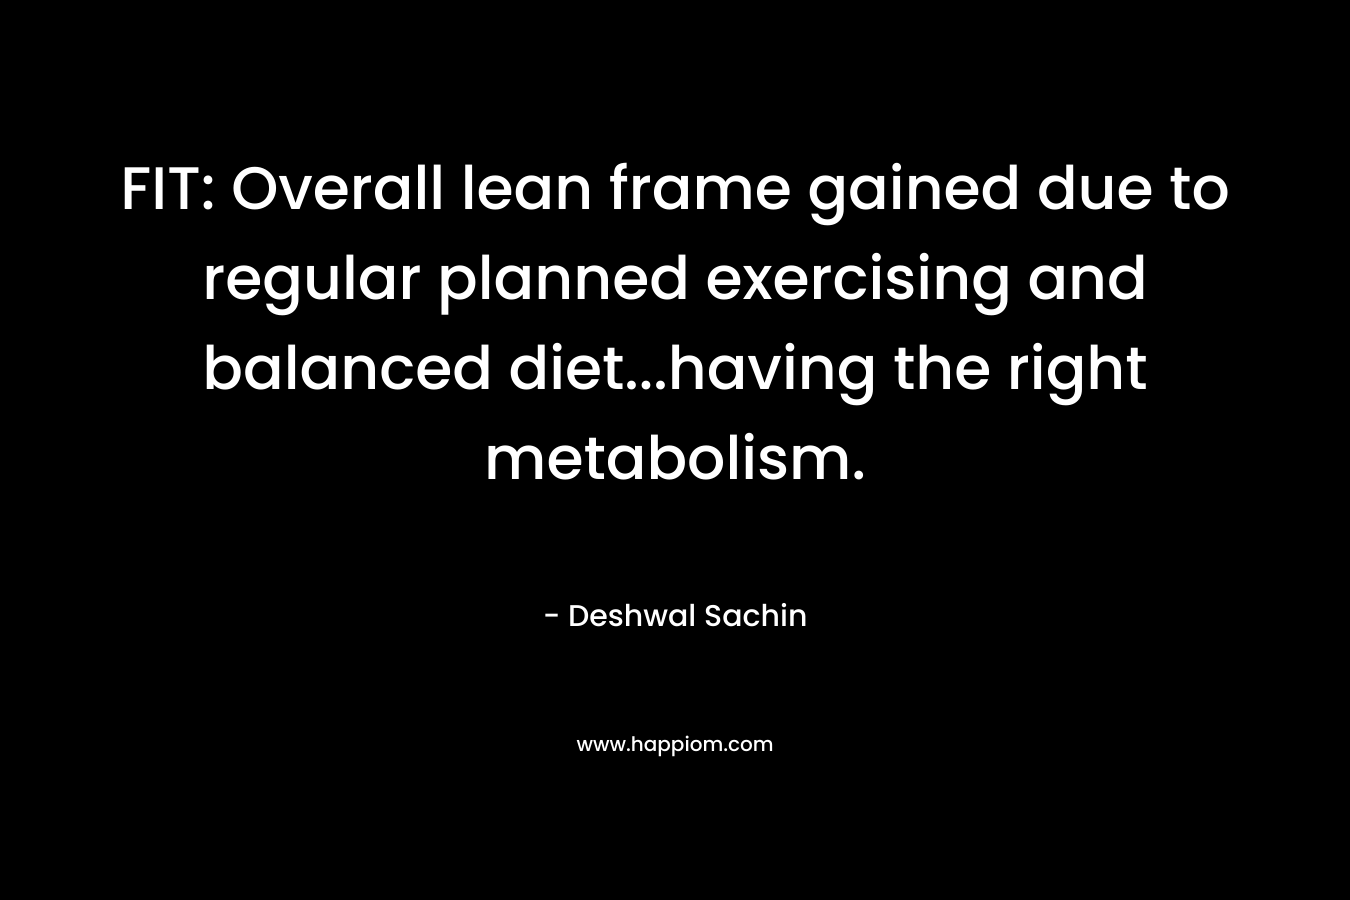 FIT: Overall lean frame gained due to regular planned exercising and balanced diet…having the right metabolism. – Deshwal Sachin